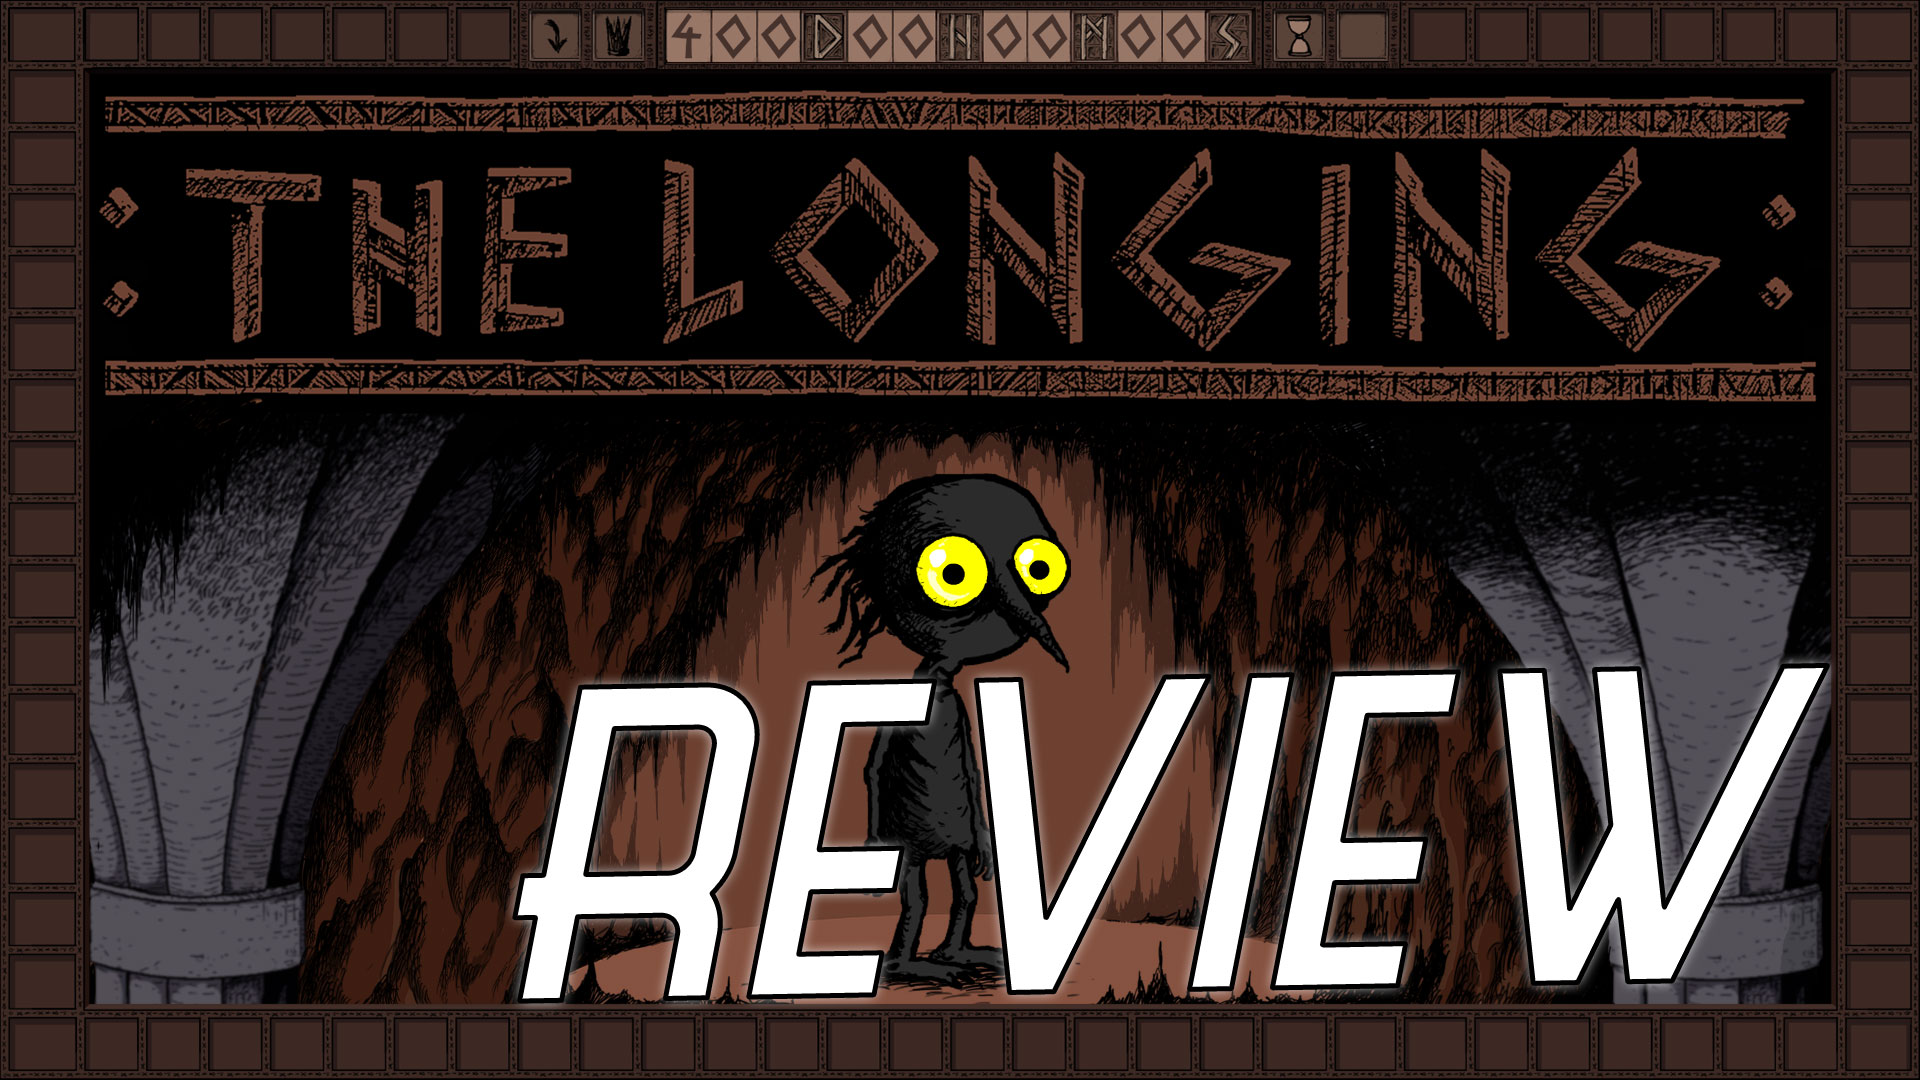 It is long game. The longing игра. Long i games. Go to Bed: Survive the Night.